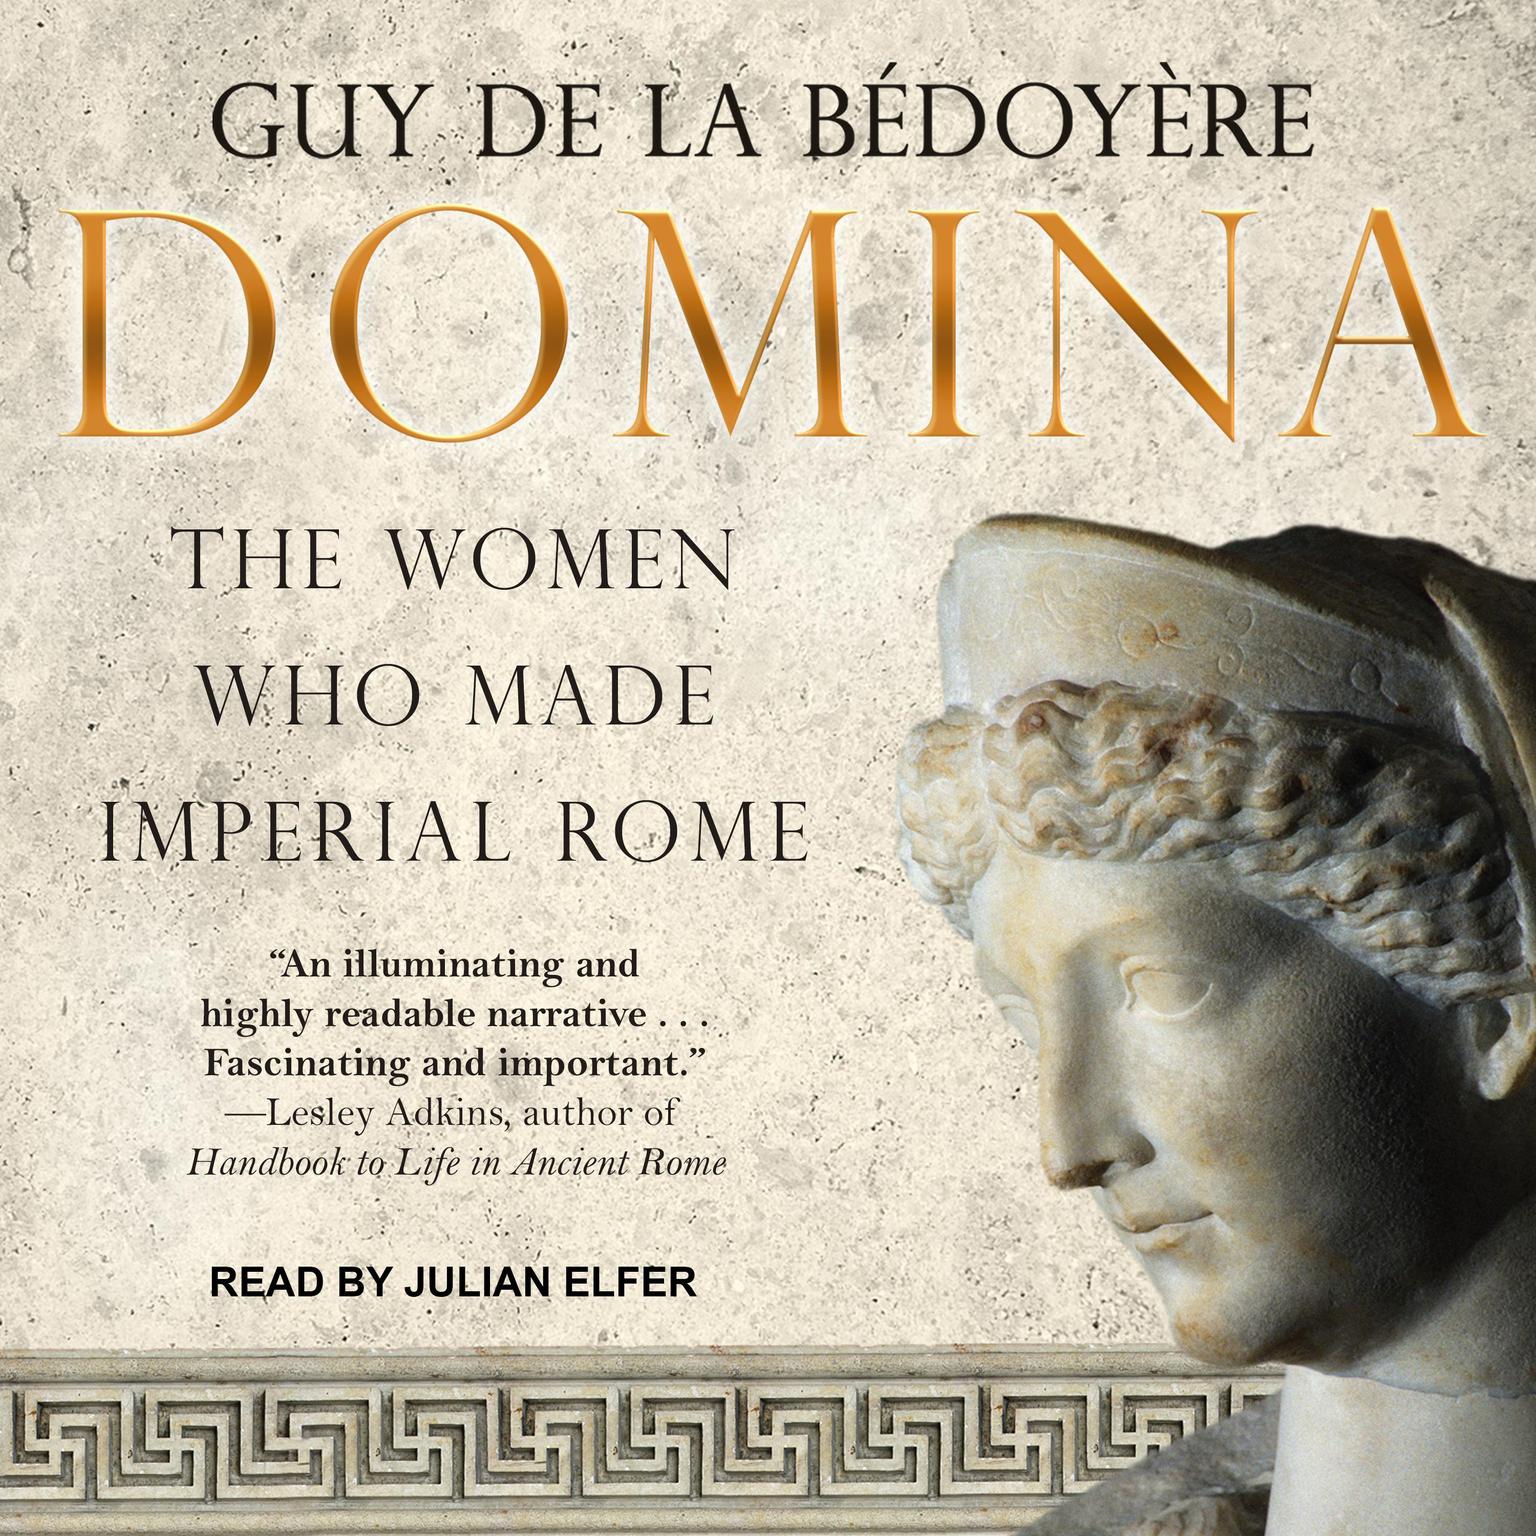 Domina: The Women Who Made Imperial Rome Audiobook, by Guy de la Bédoyère